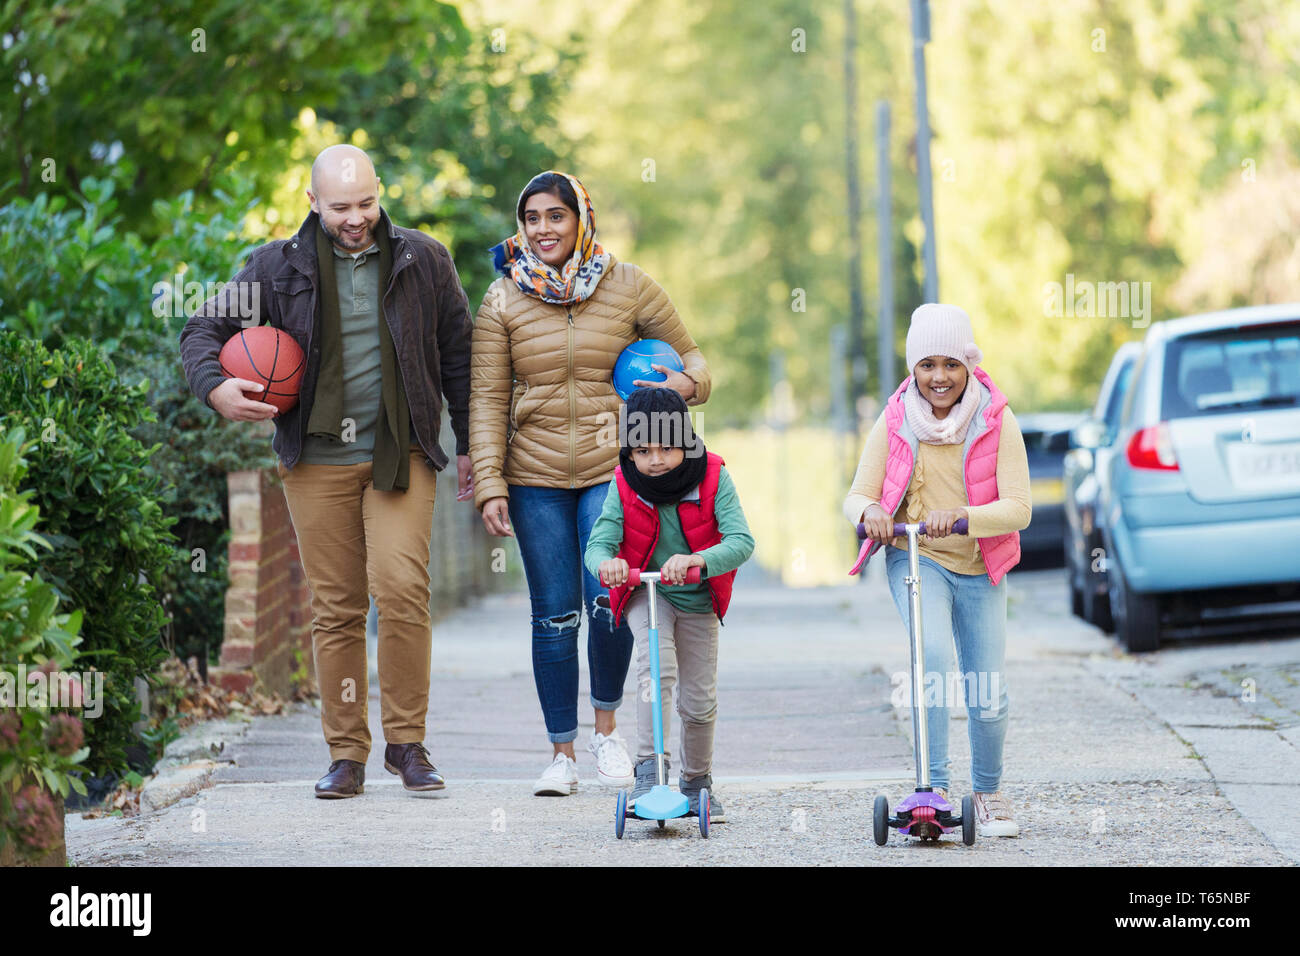 Muslim family watching and riding scooter on sidewalk Stock Photo